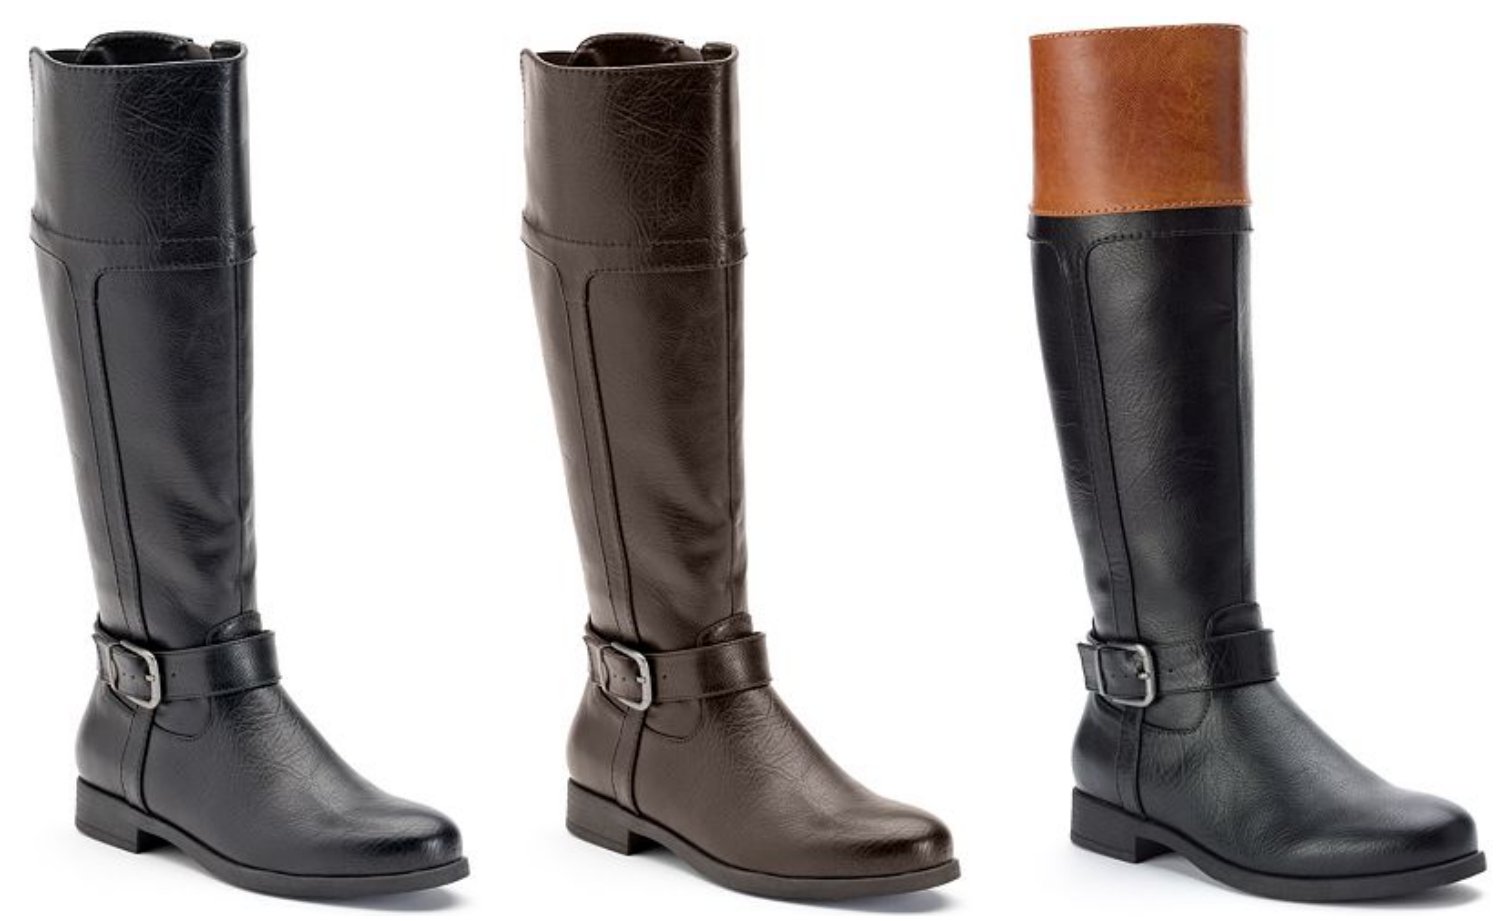 www.ermes-unice.fr Extra 30% Off Boots Sale & Add&#39;l 20% Off = Women&#39;s Riding Boots $25.19 (Reg. $84.99 ...